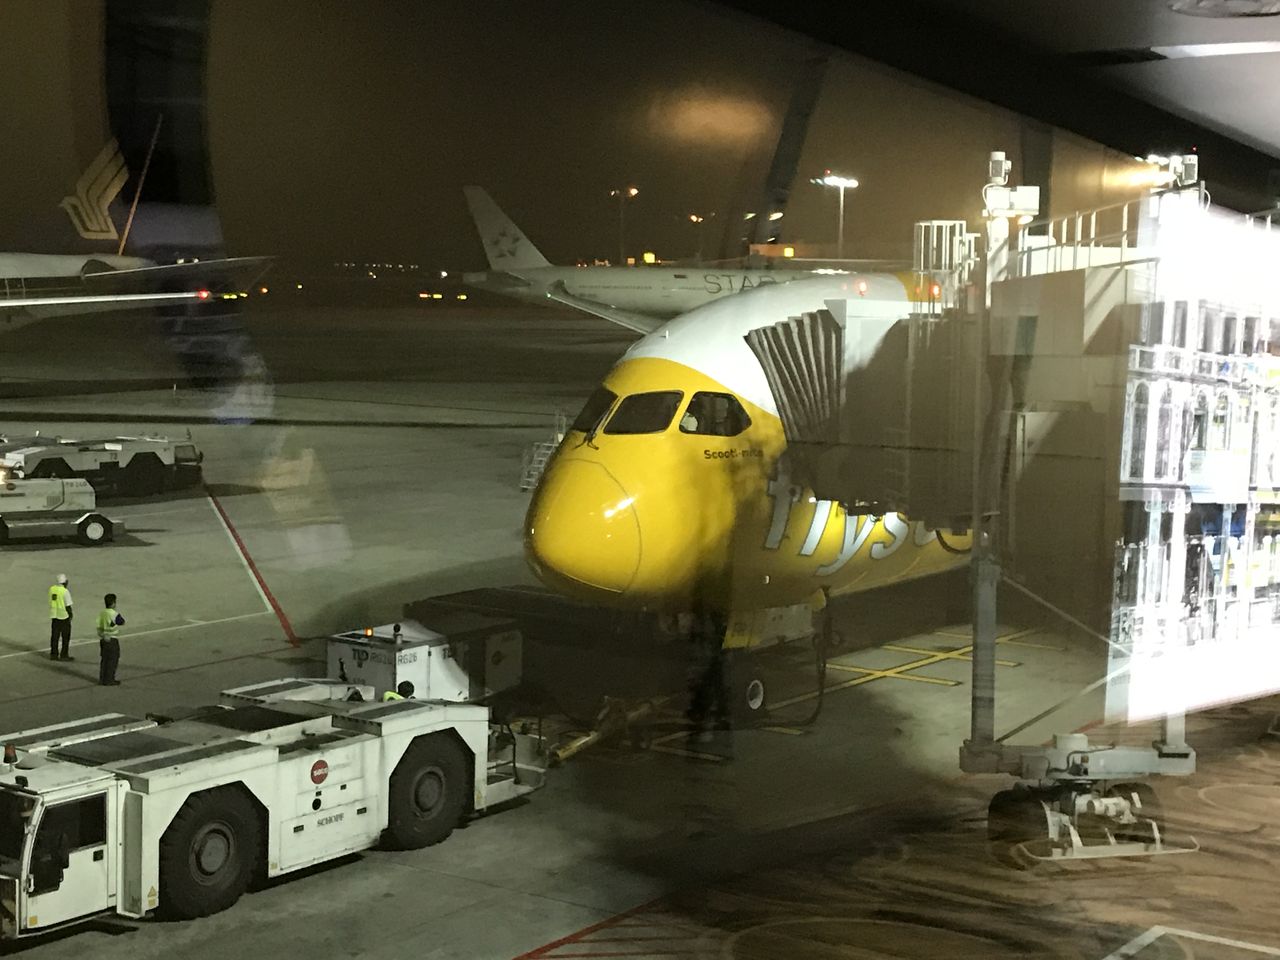 Review of Scoot flight from Singapore to Taipei in Economy